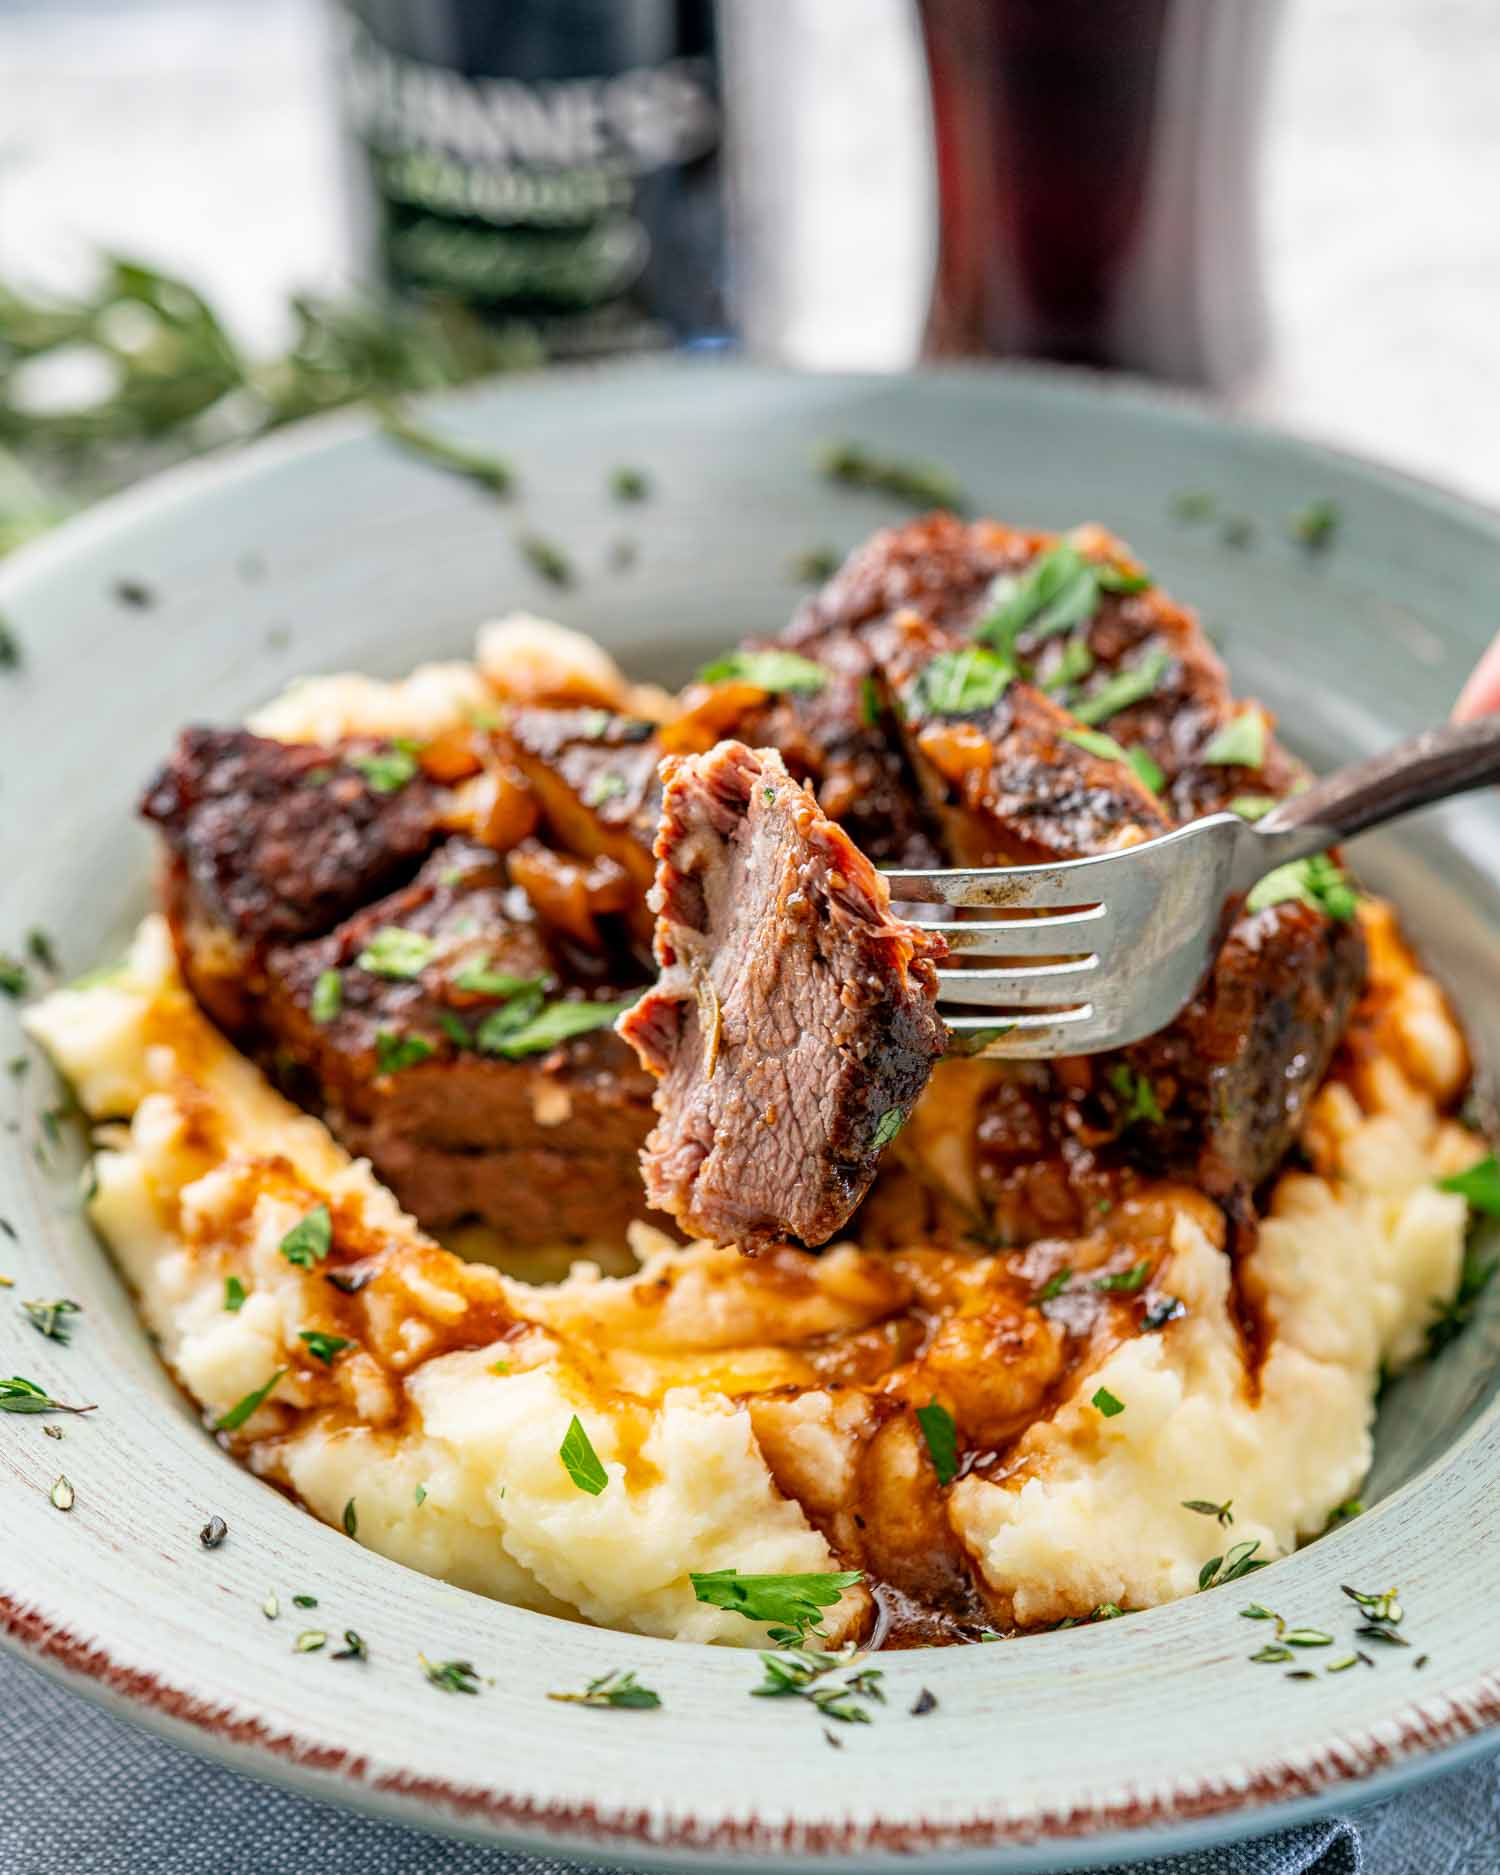 two guinness braised short ribs on a bed of mashed potatoes in a plate.